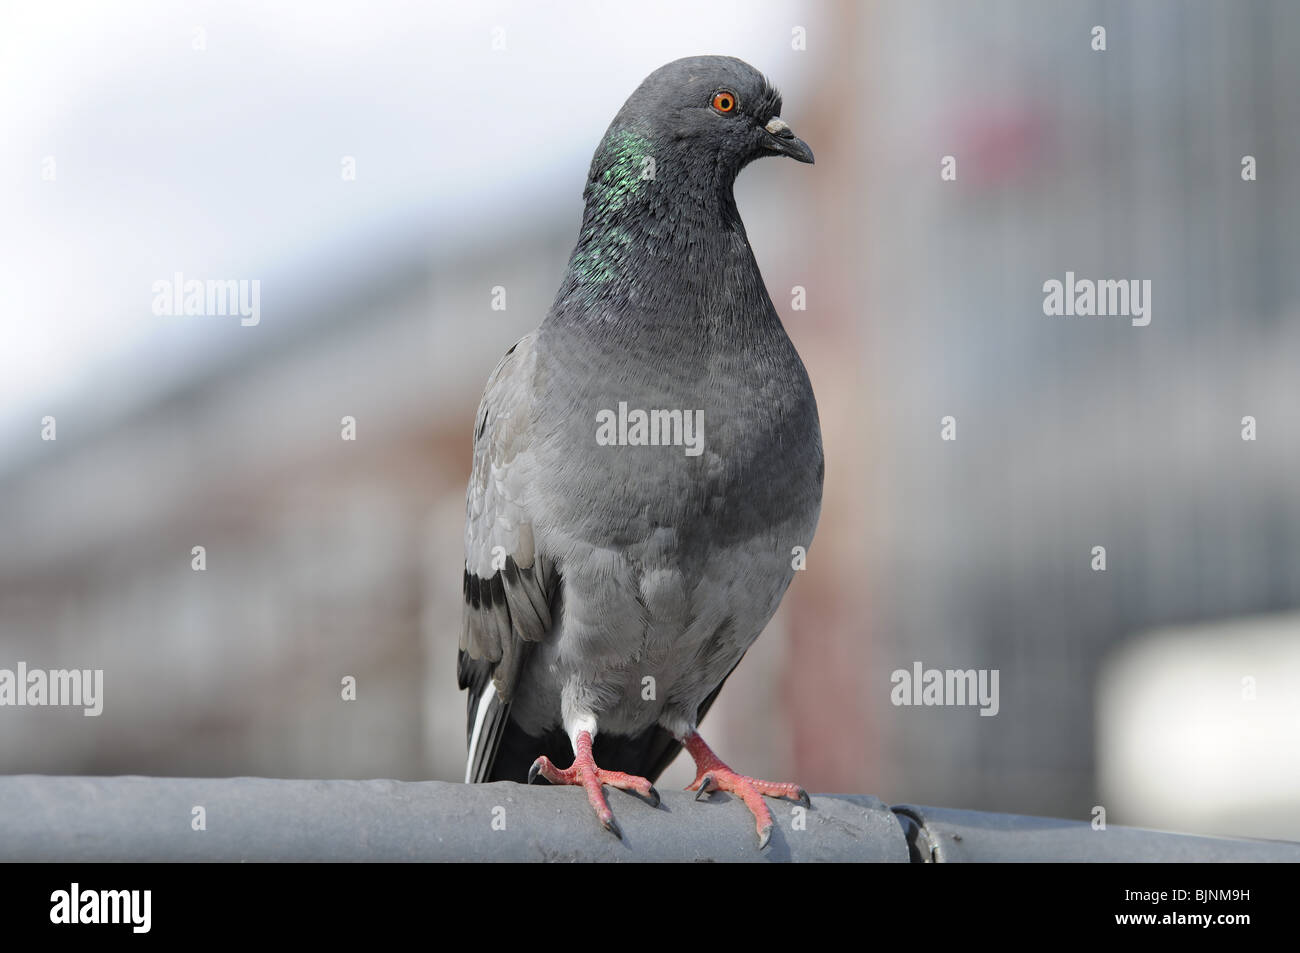 Pigeon closeup on blurred background Stock Photo